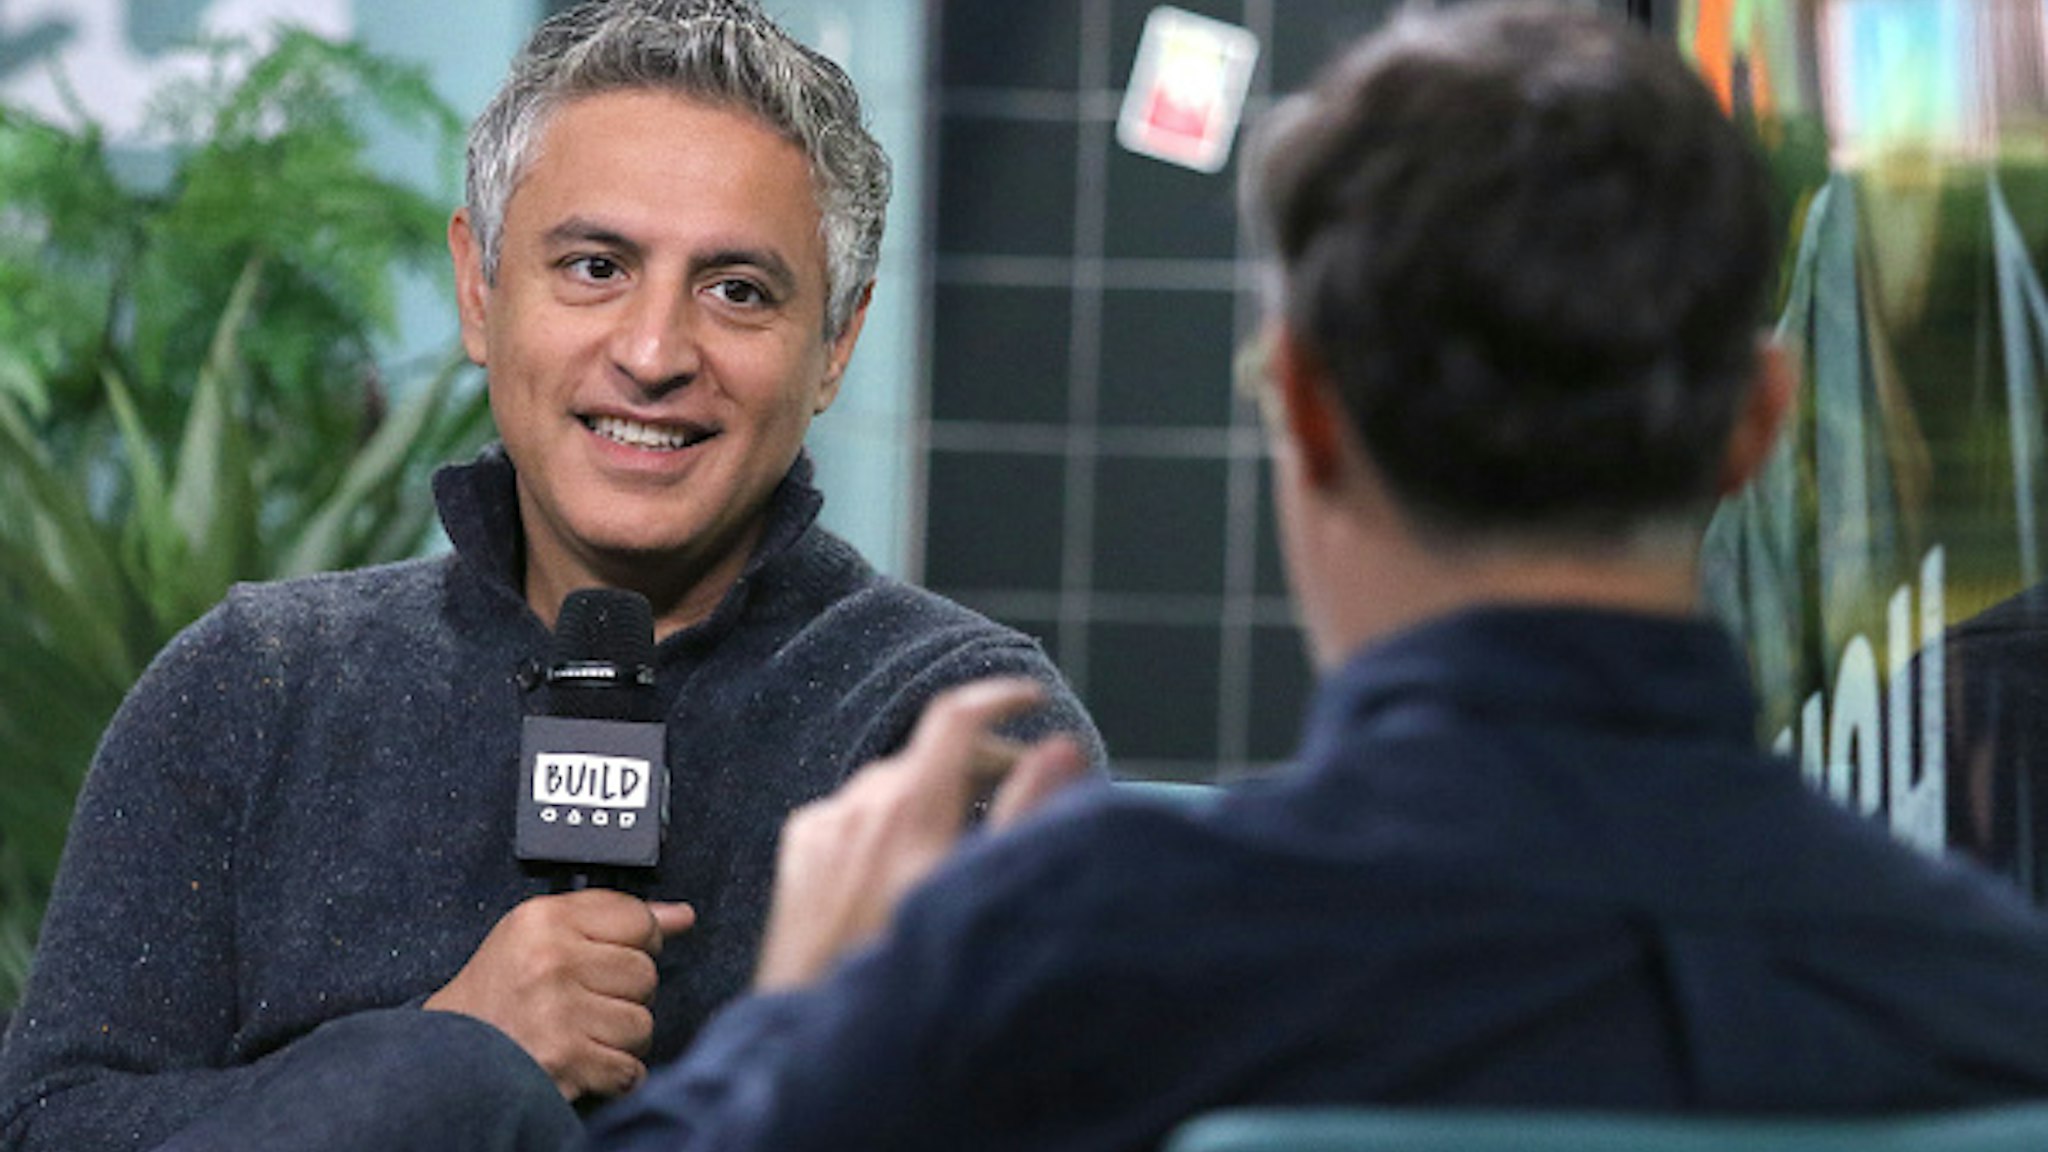 NEW YORK, NEW YORK - NOVEMBER 14: Writer Reza Aslan (L) and moderator Ricky Camilleri attends the Build Series to discuss his TV program "Rough Draft" at Build Studio on November 14, 2019 in New York City.